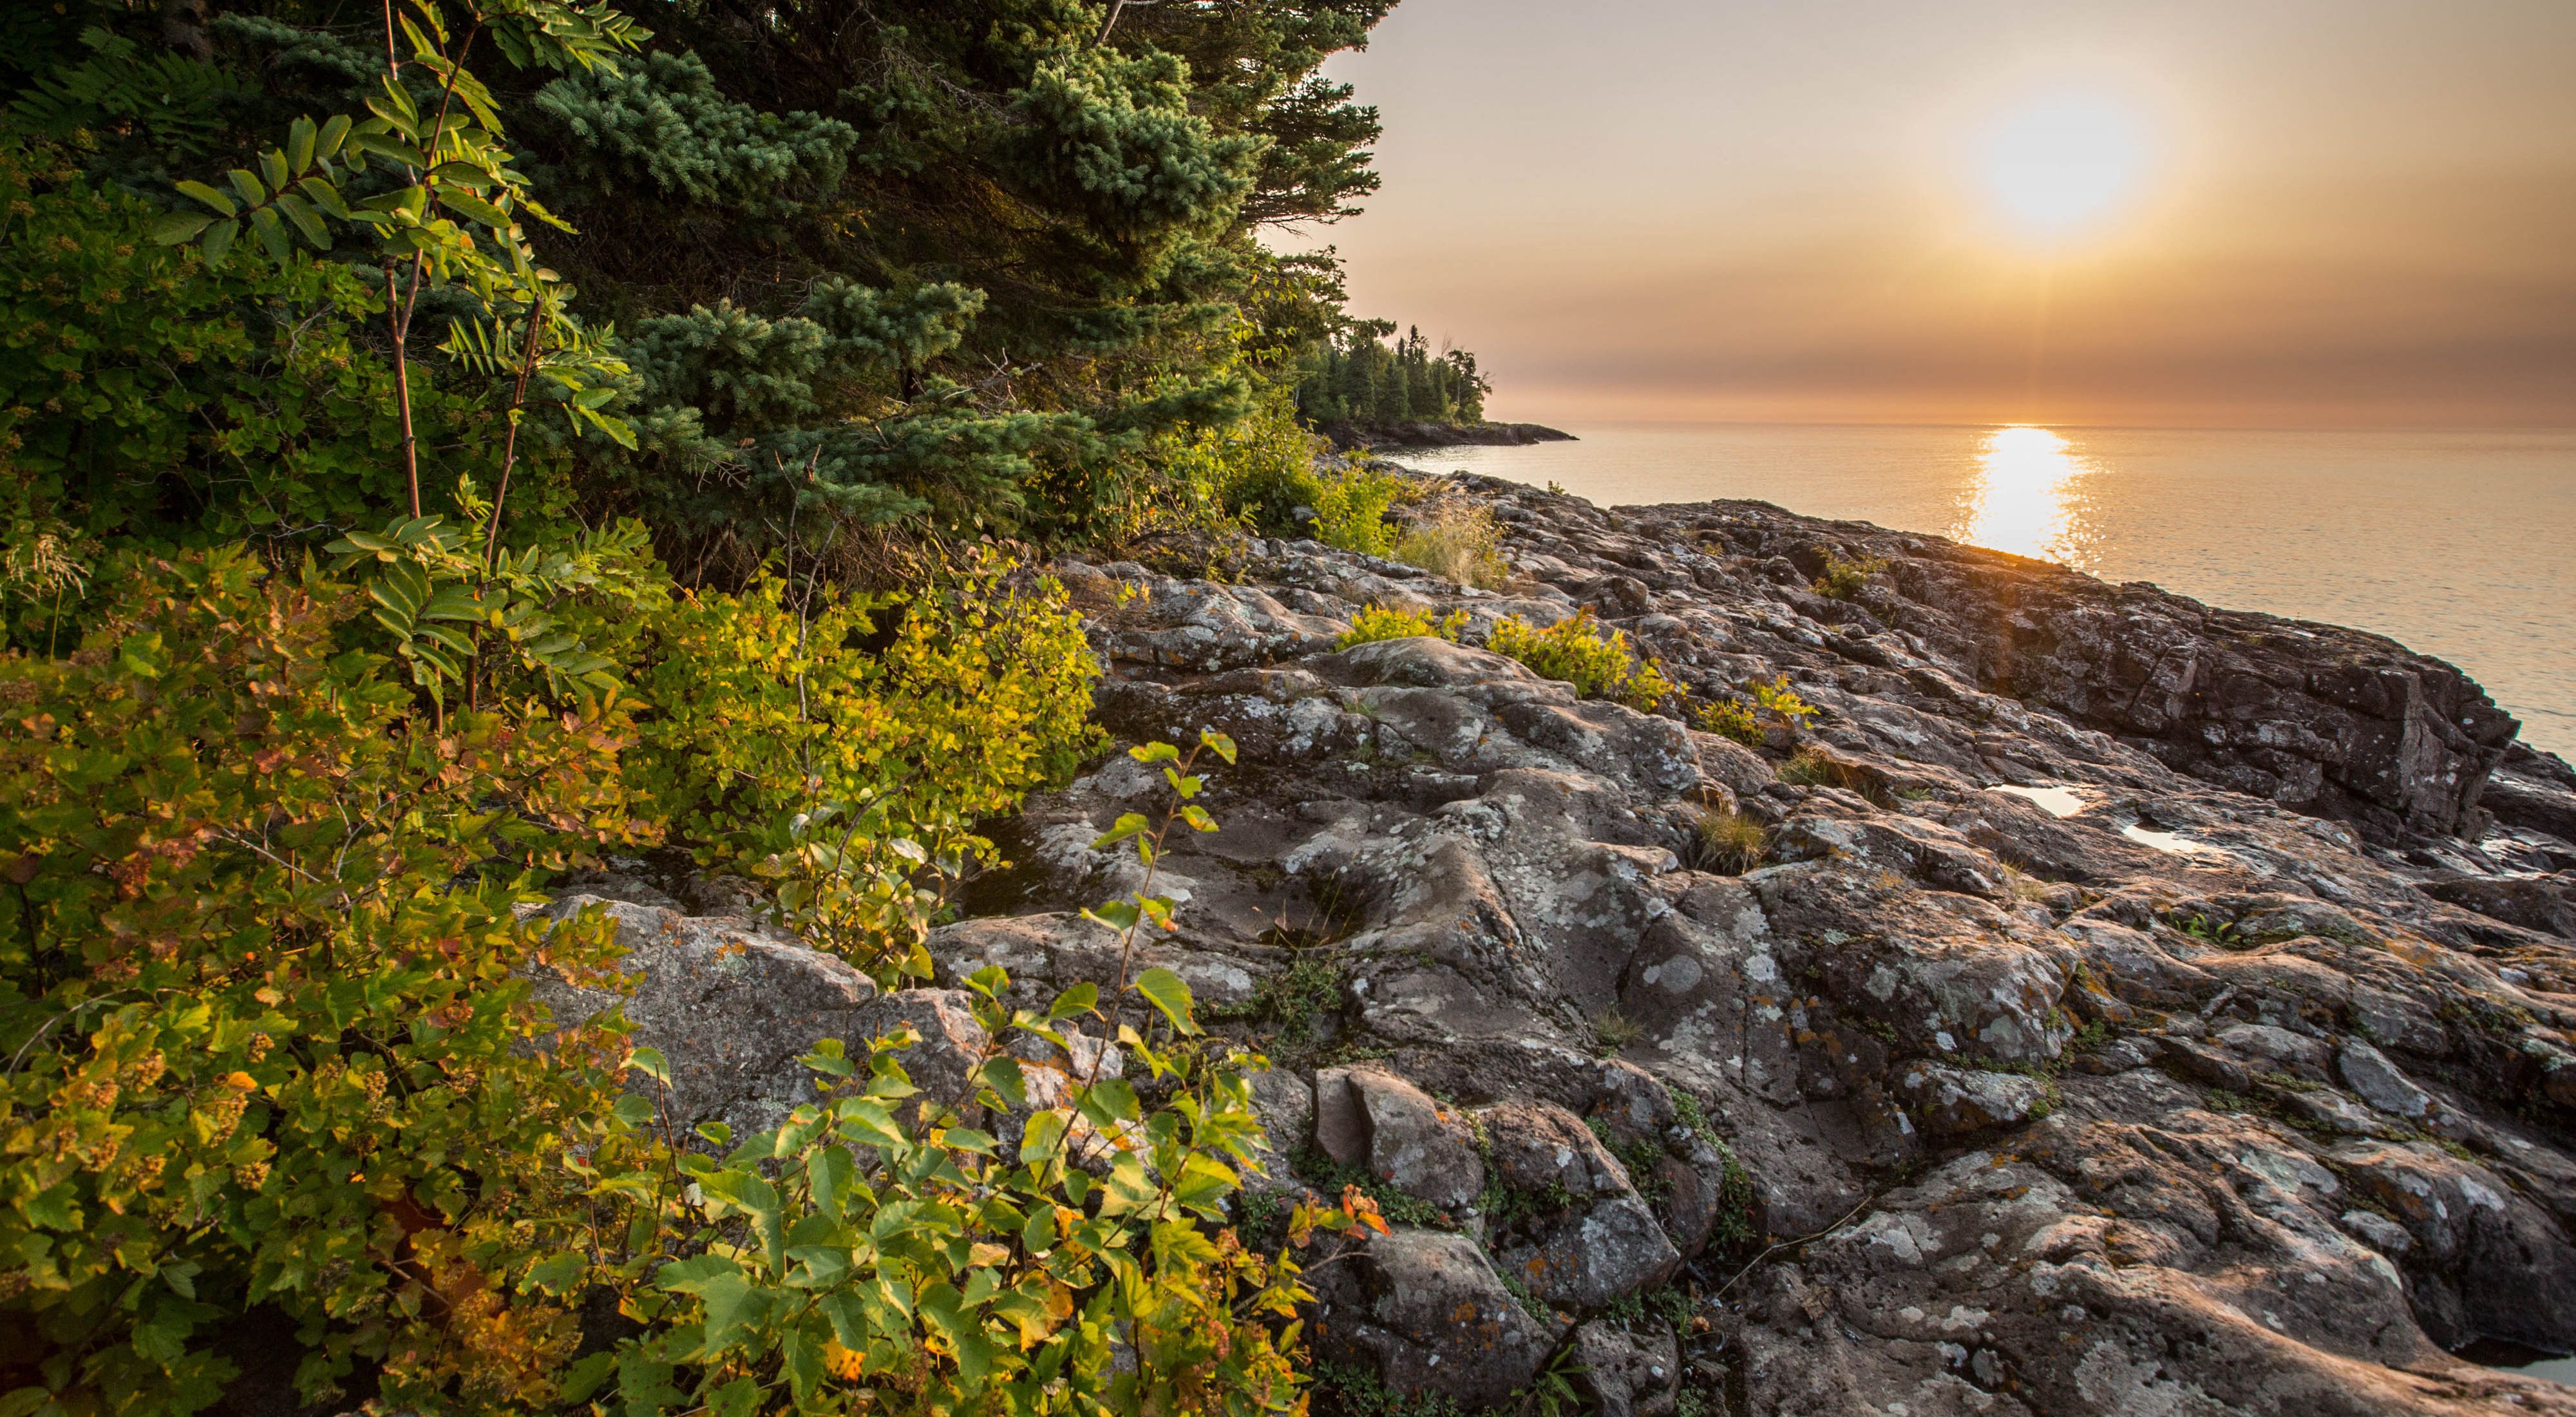 The sun sets over Lake Superior on Lake Superior’s North Shore in Minnesota along the Boundary Waters.